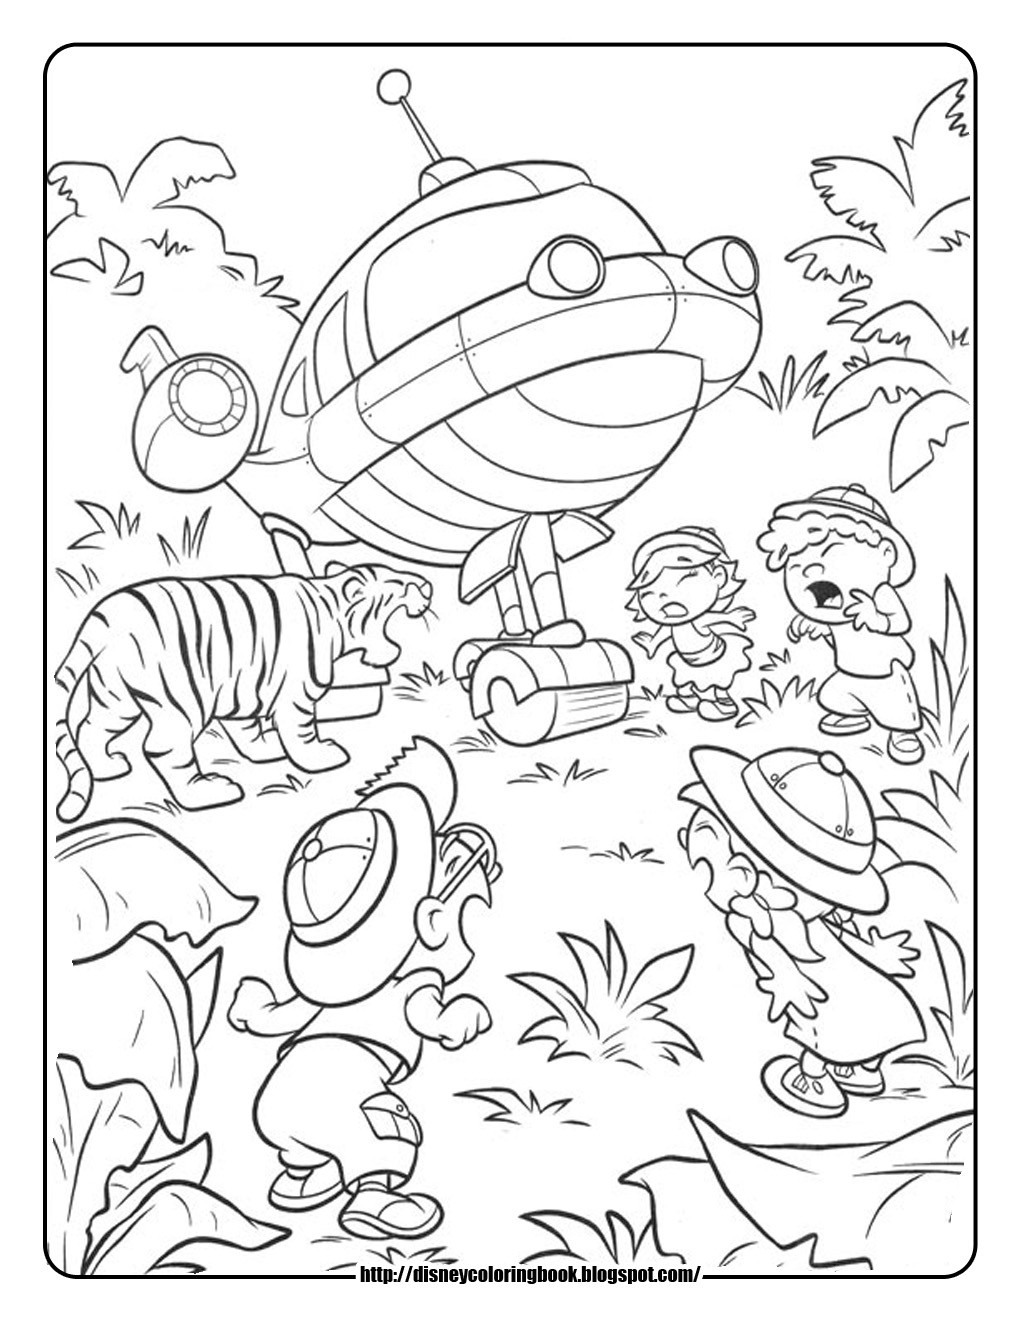 Coloring Sheets For Little Kids
 Disney Coloring Pages and Sheets for Kids Little